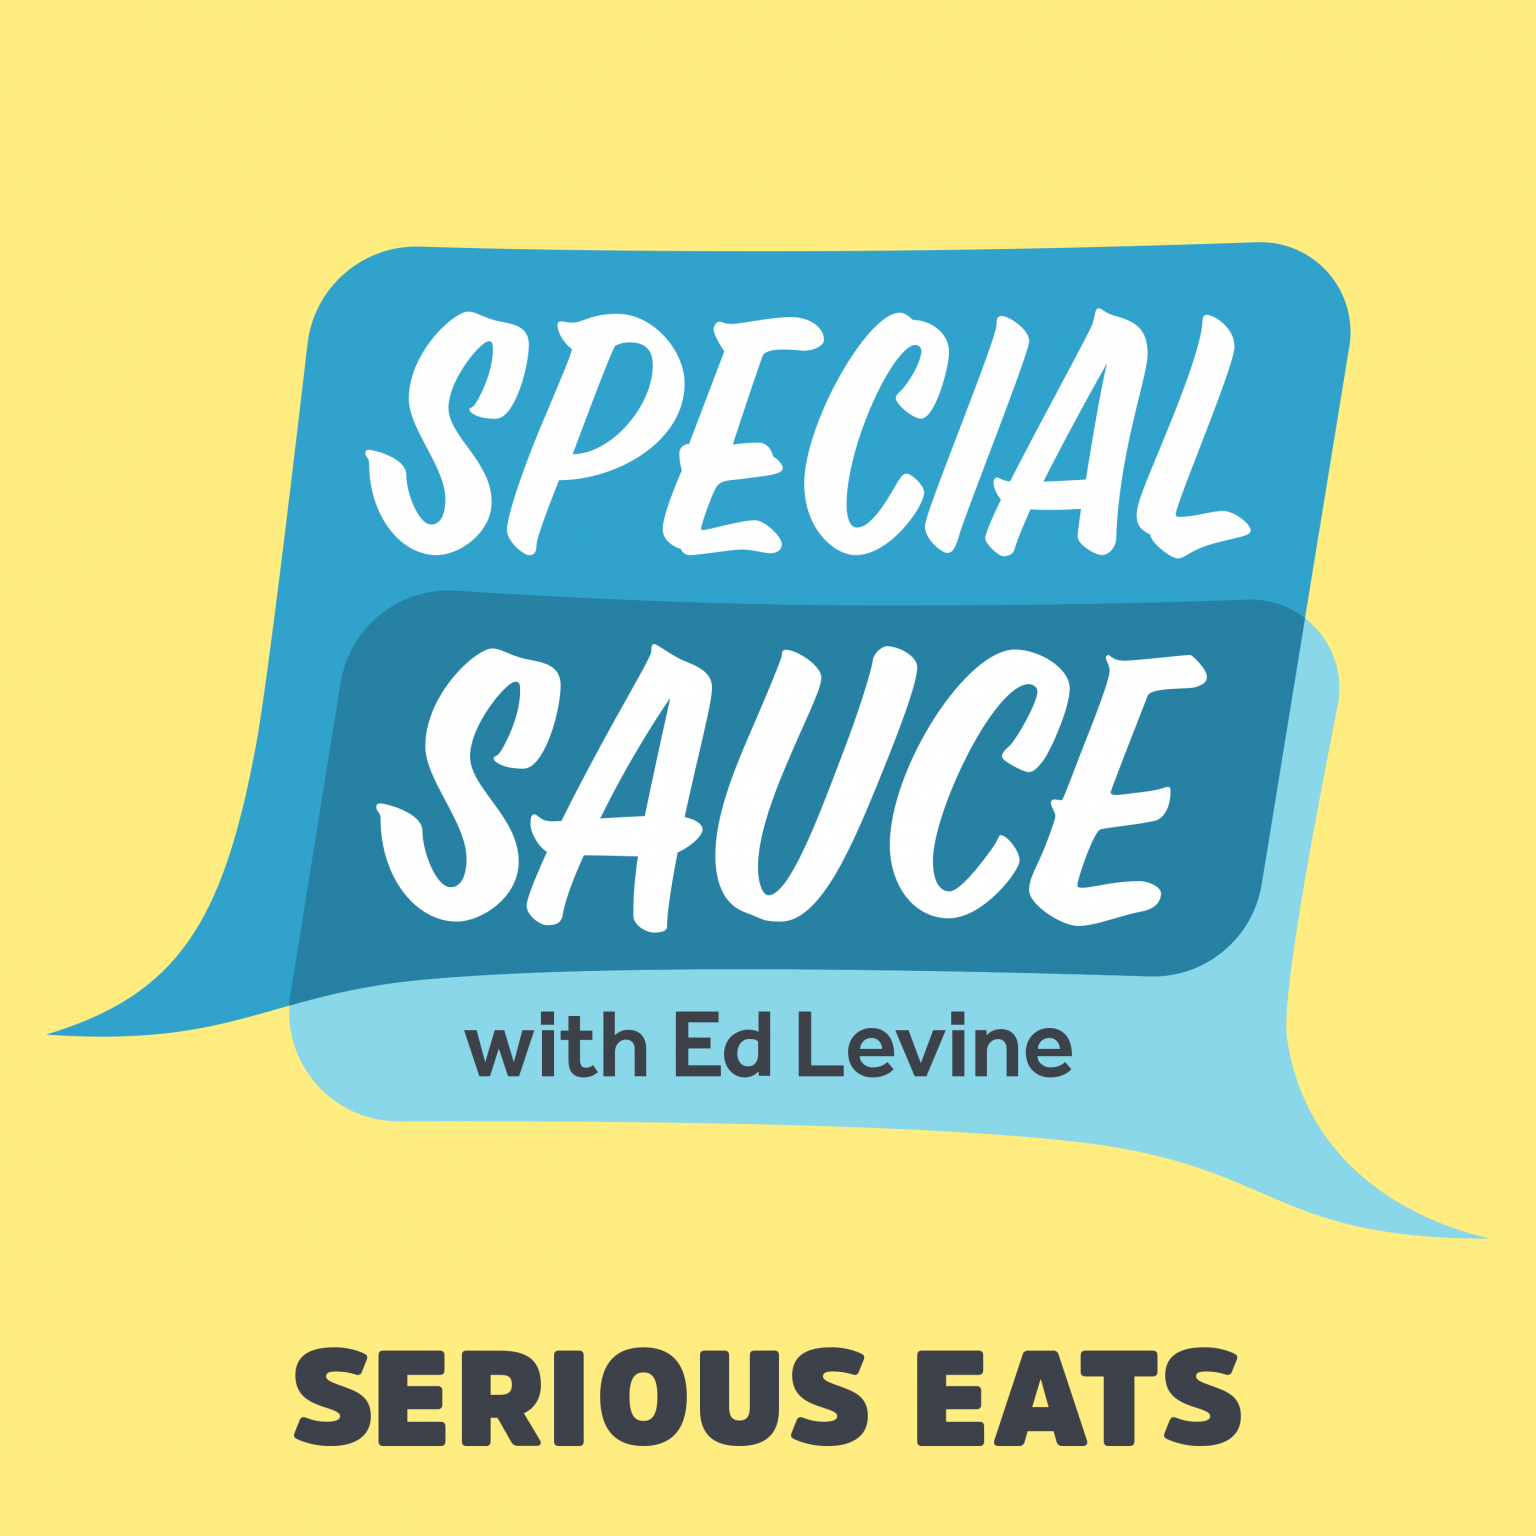 Special Sauce Live, Ed Levine Edition: Serious Eats Lives! [2/2]